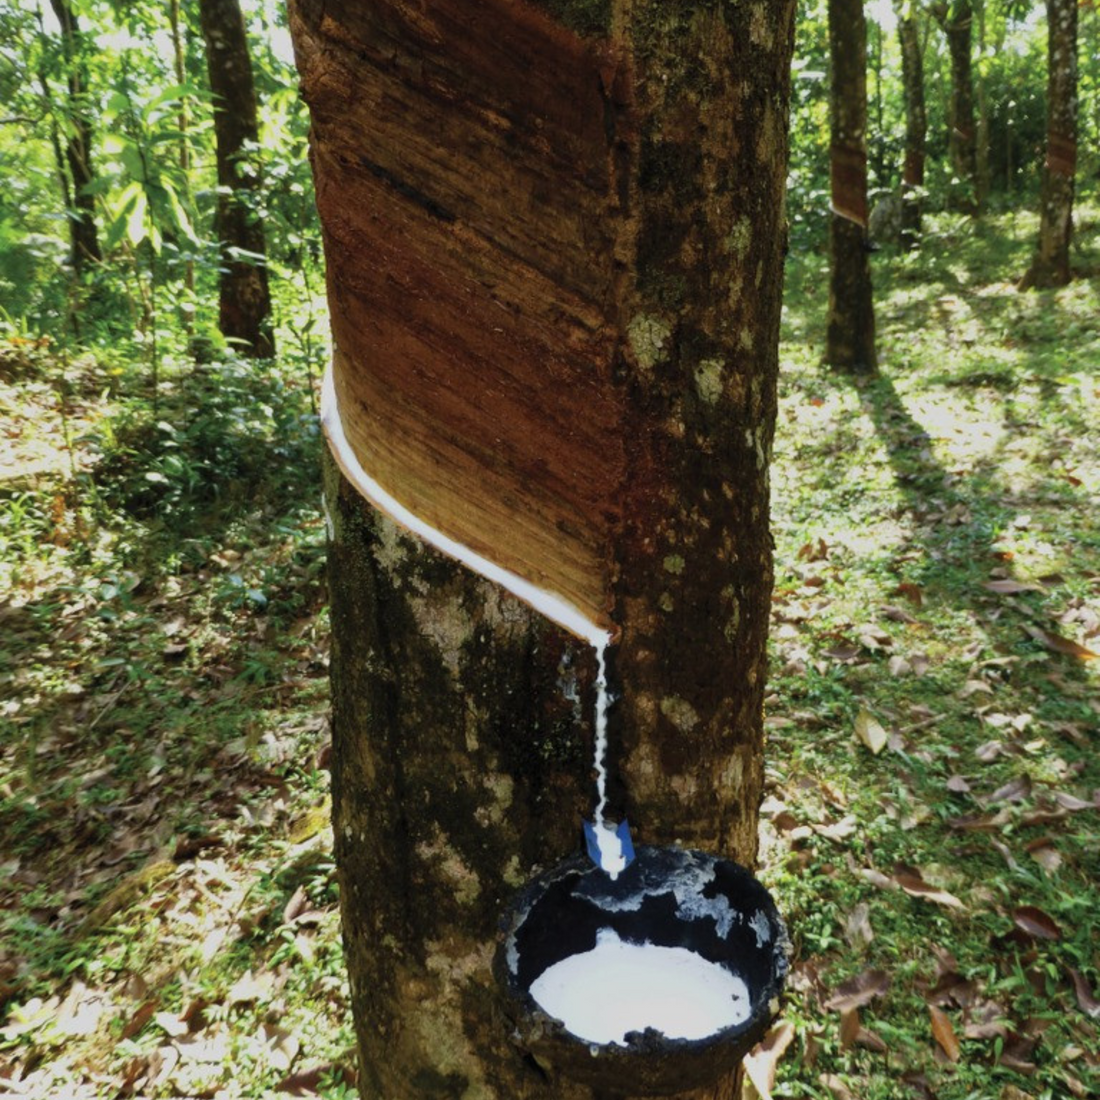 RUBBER - a Natural Treasure from The Jungle